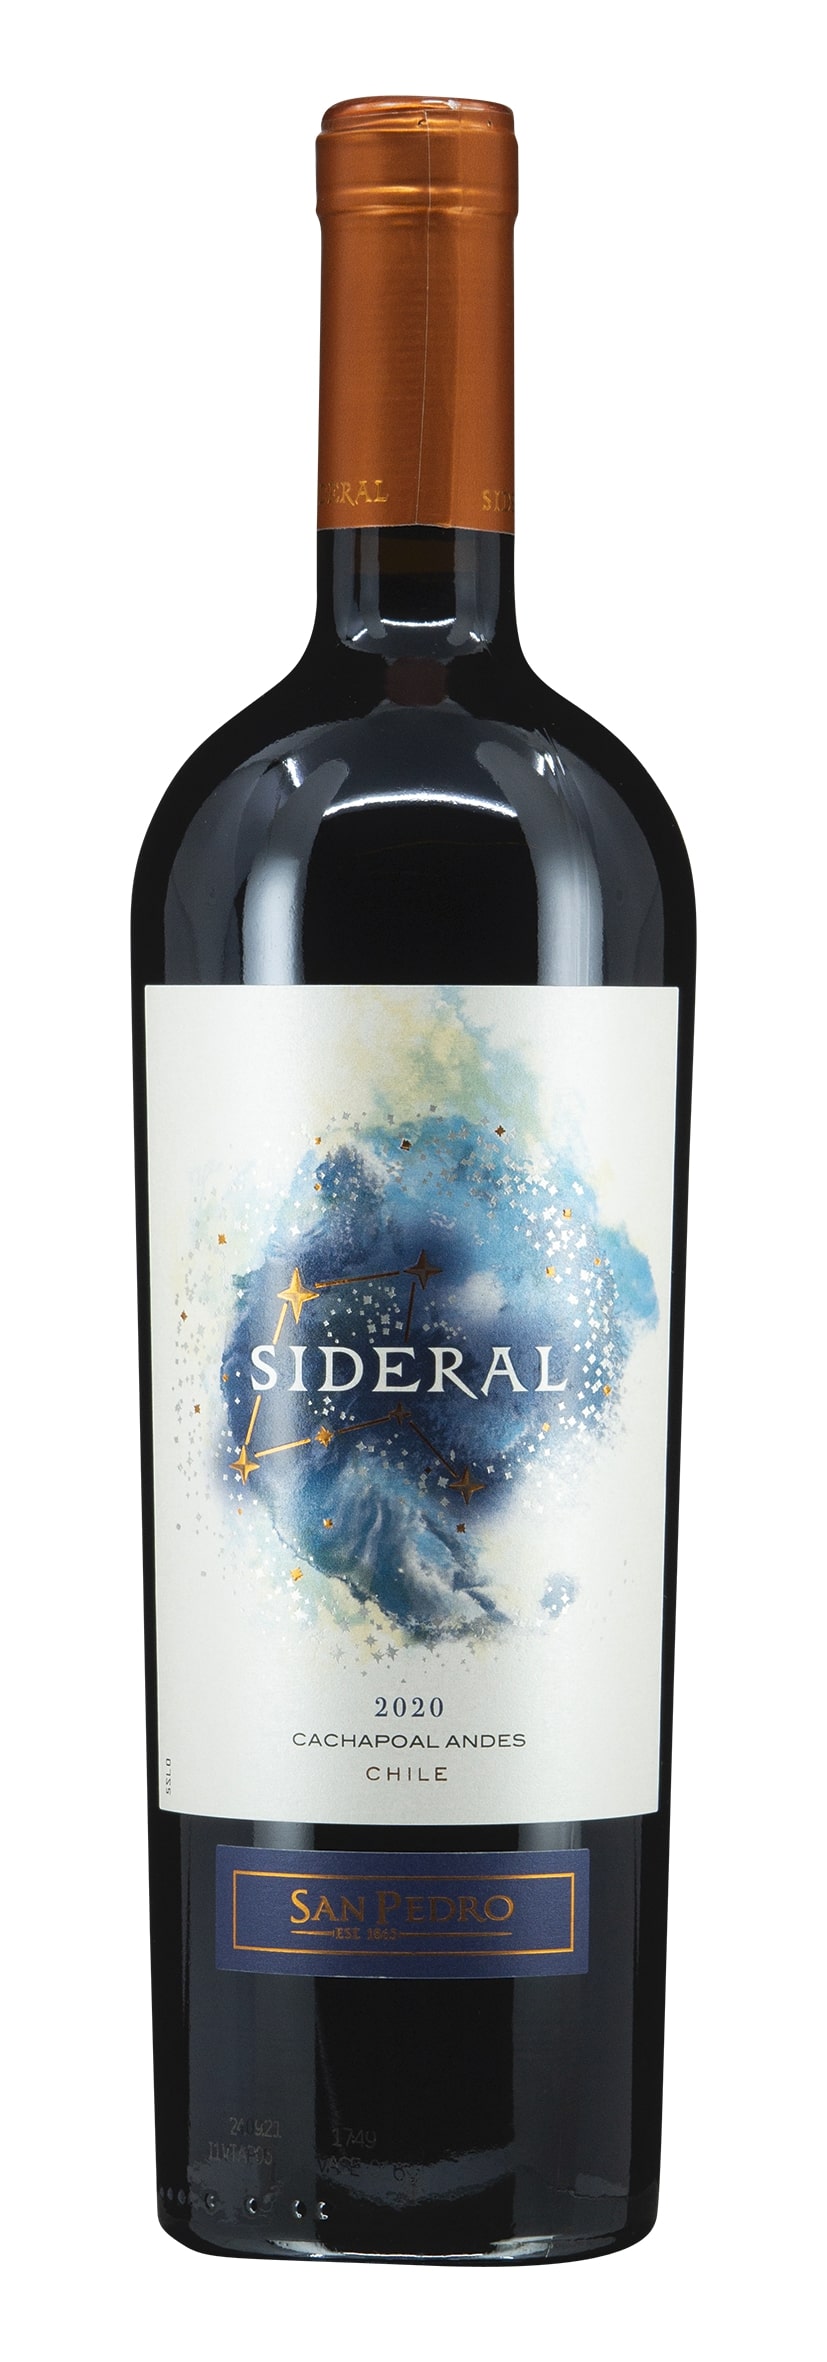 Valle de Cachapoal "Sideral" 2020